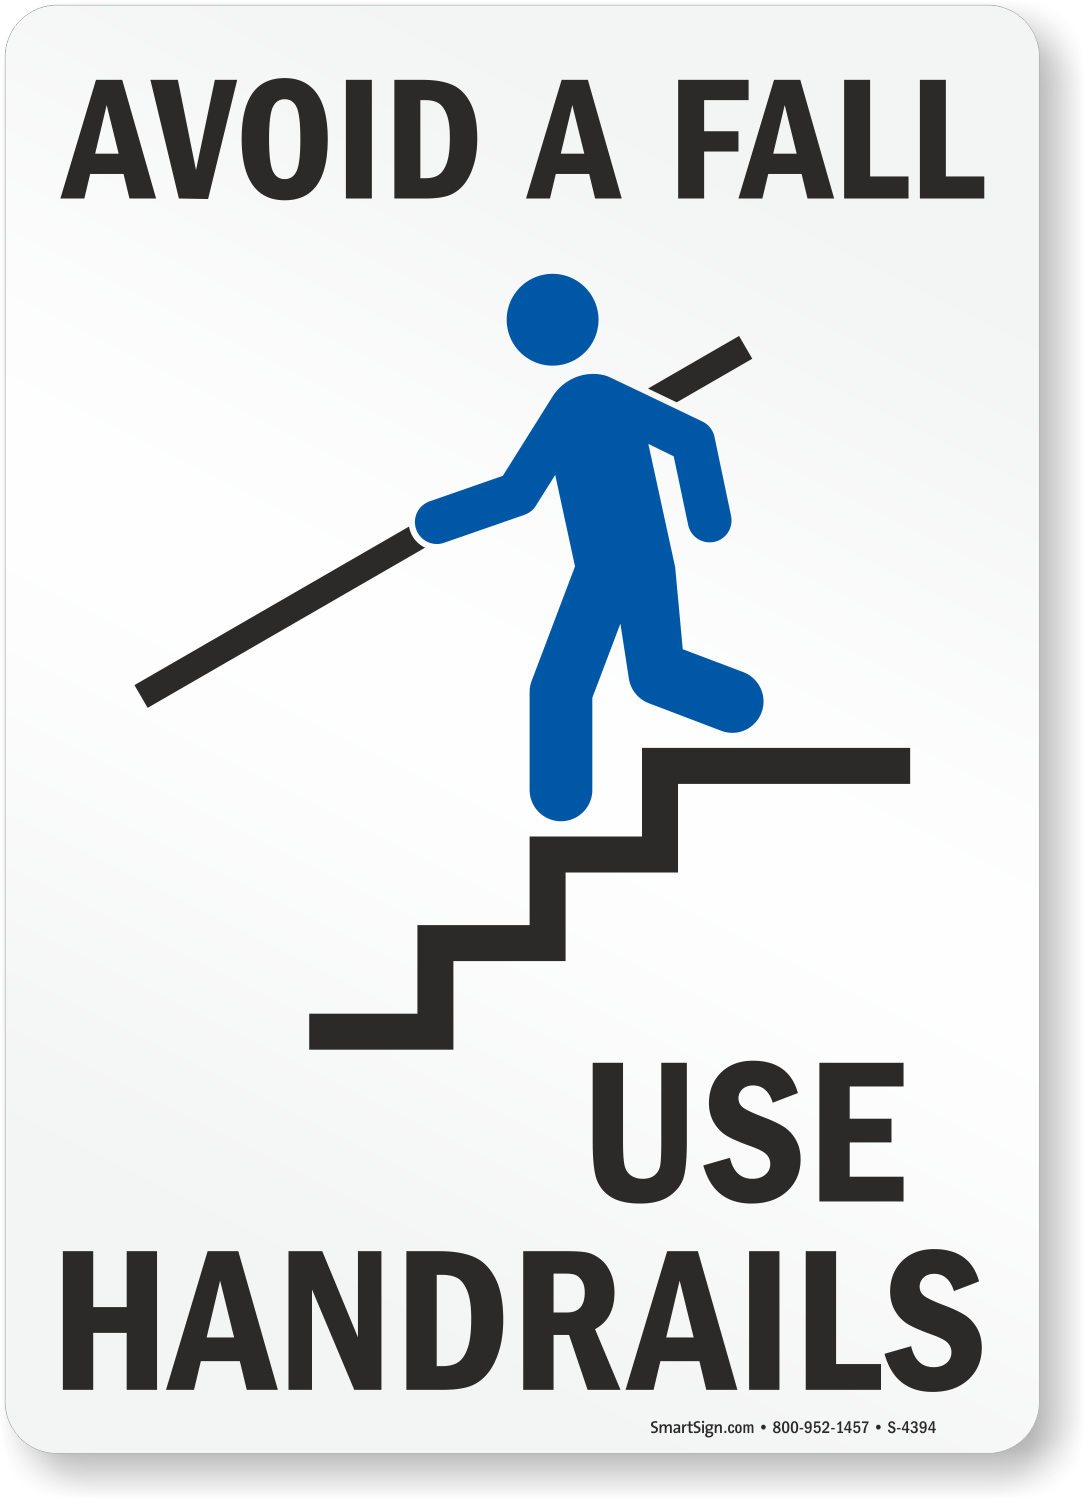 Fall used. Use Handrail sign. Avoid. Fall from Staircase sign. Signs in Stairs.